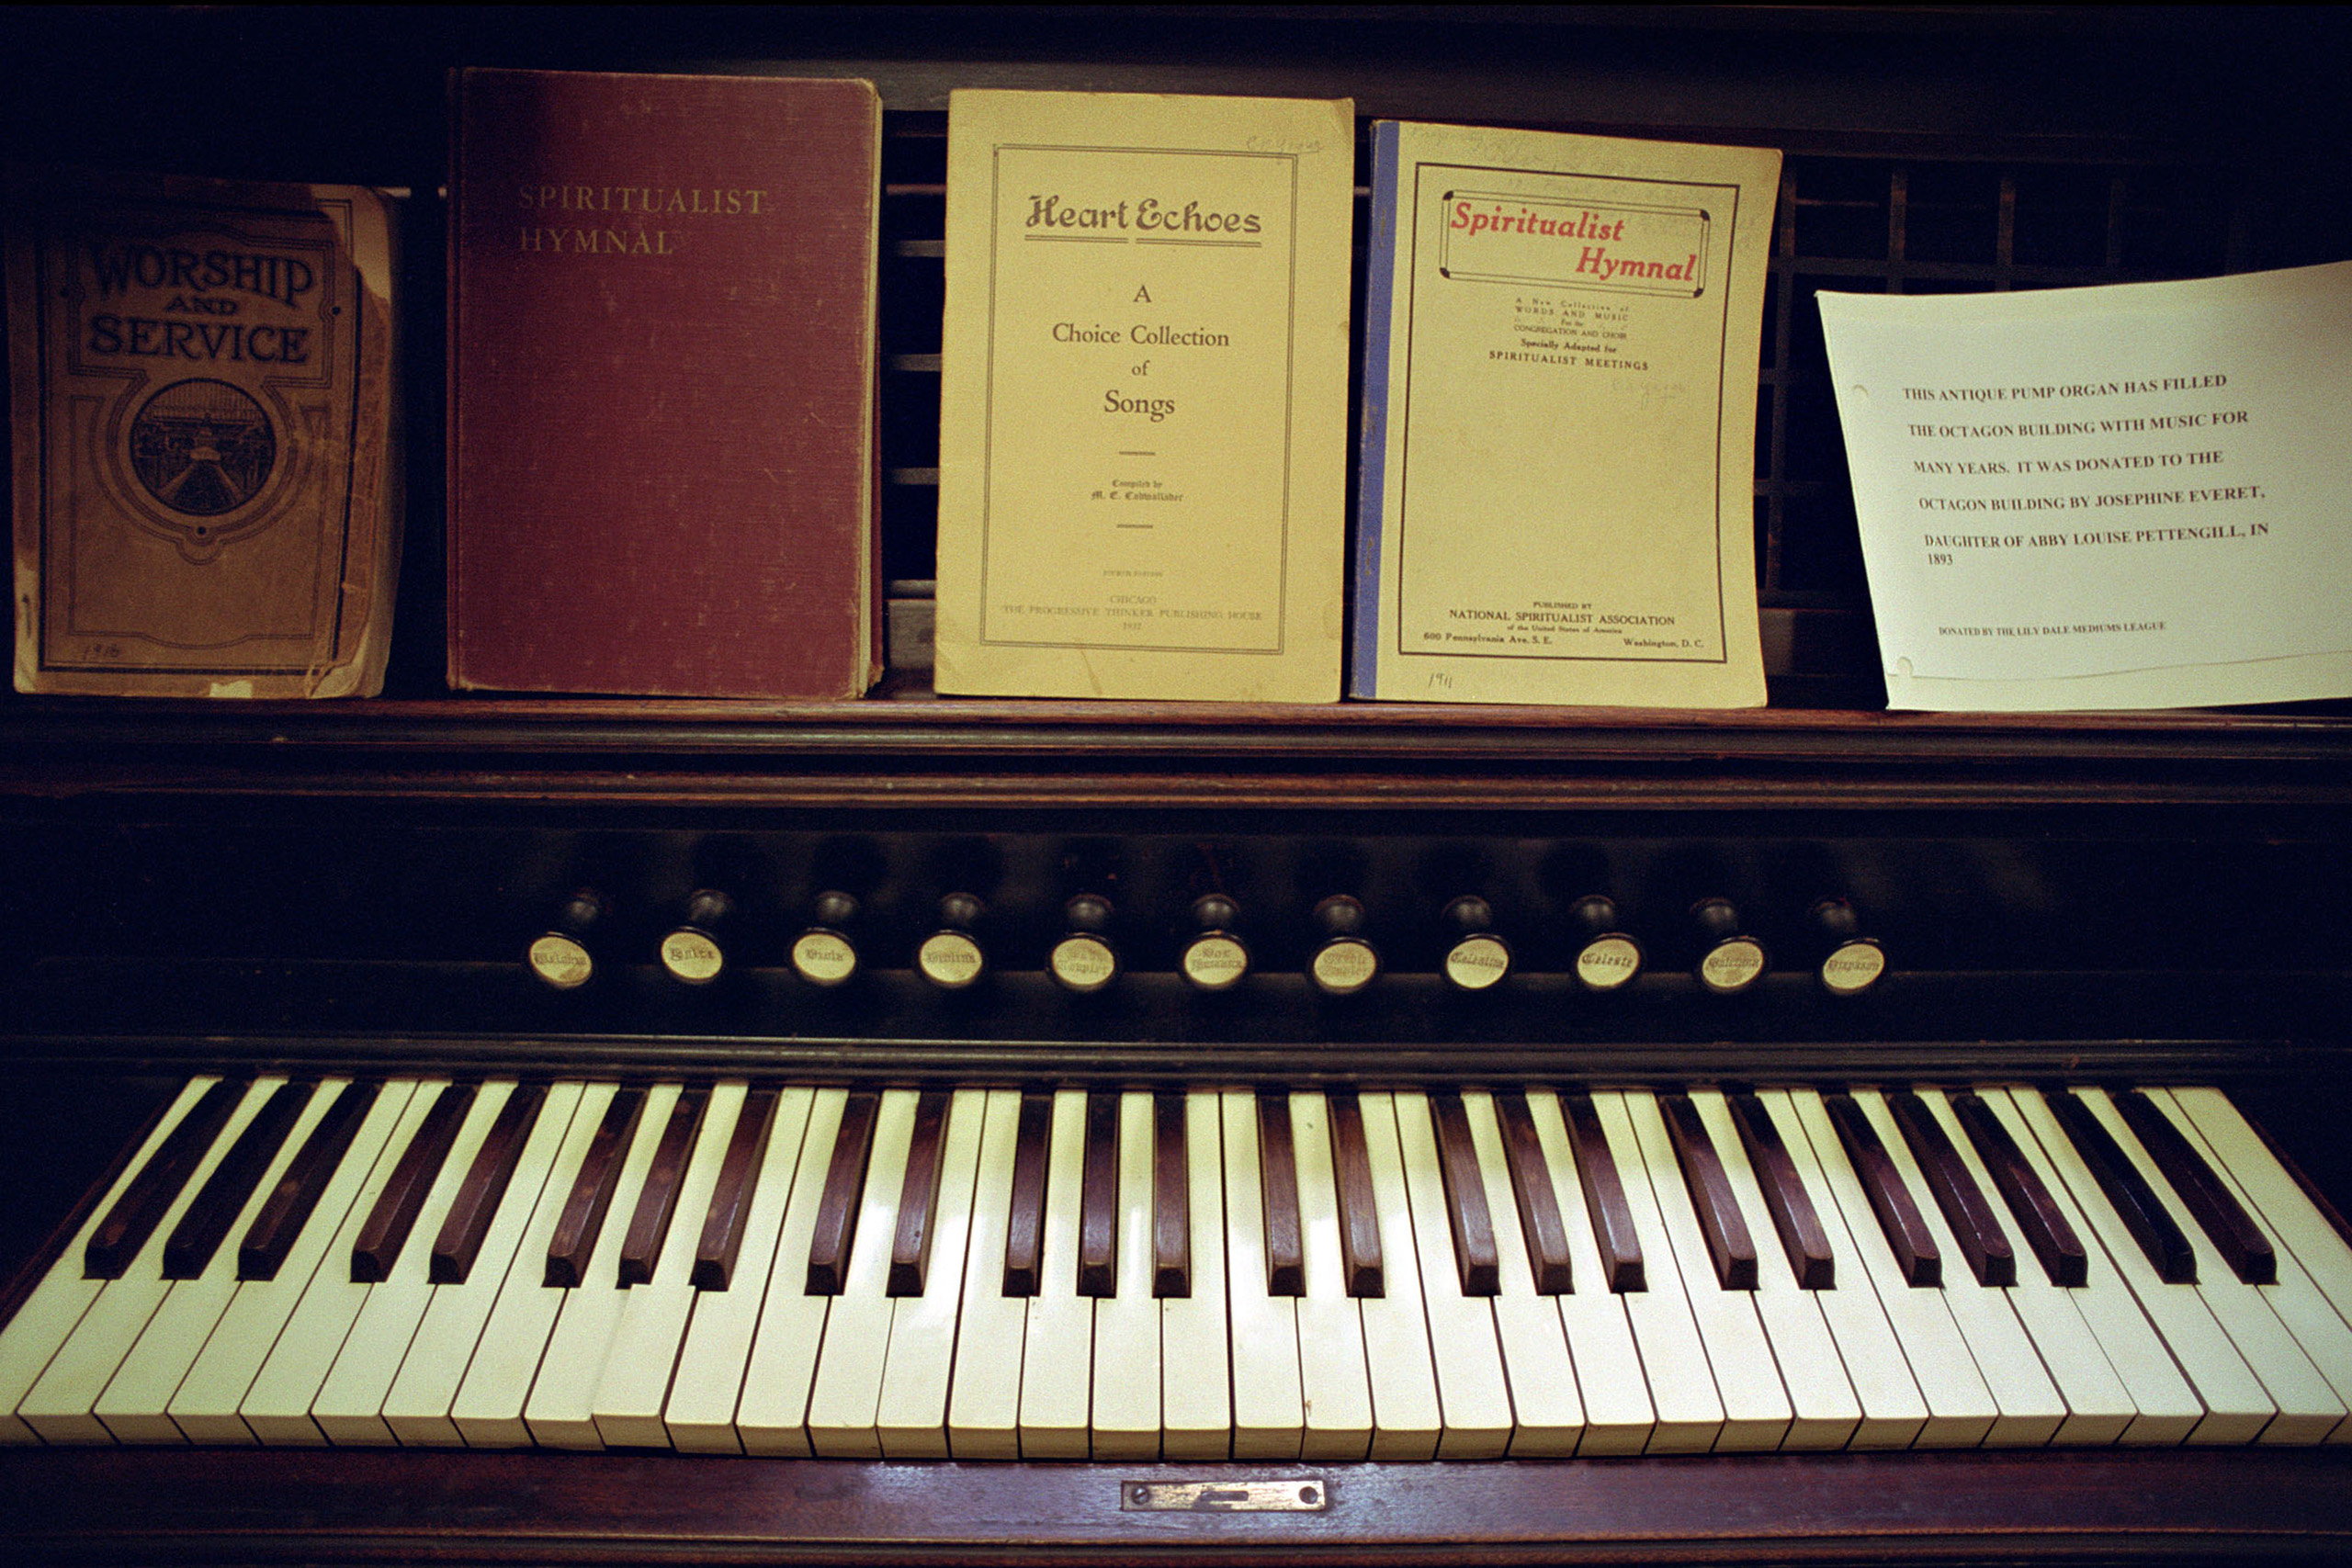 Antique organ with Spiritualist songbooks, Lily Dale Museum, Lily Dale, New York, 2001.